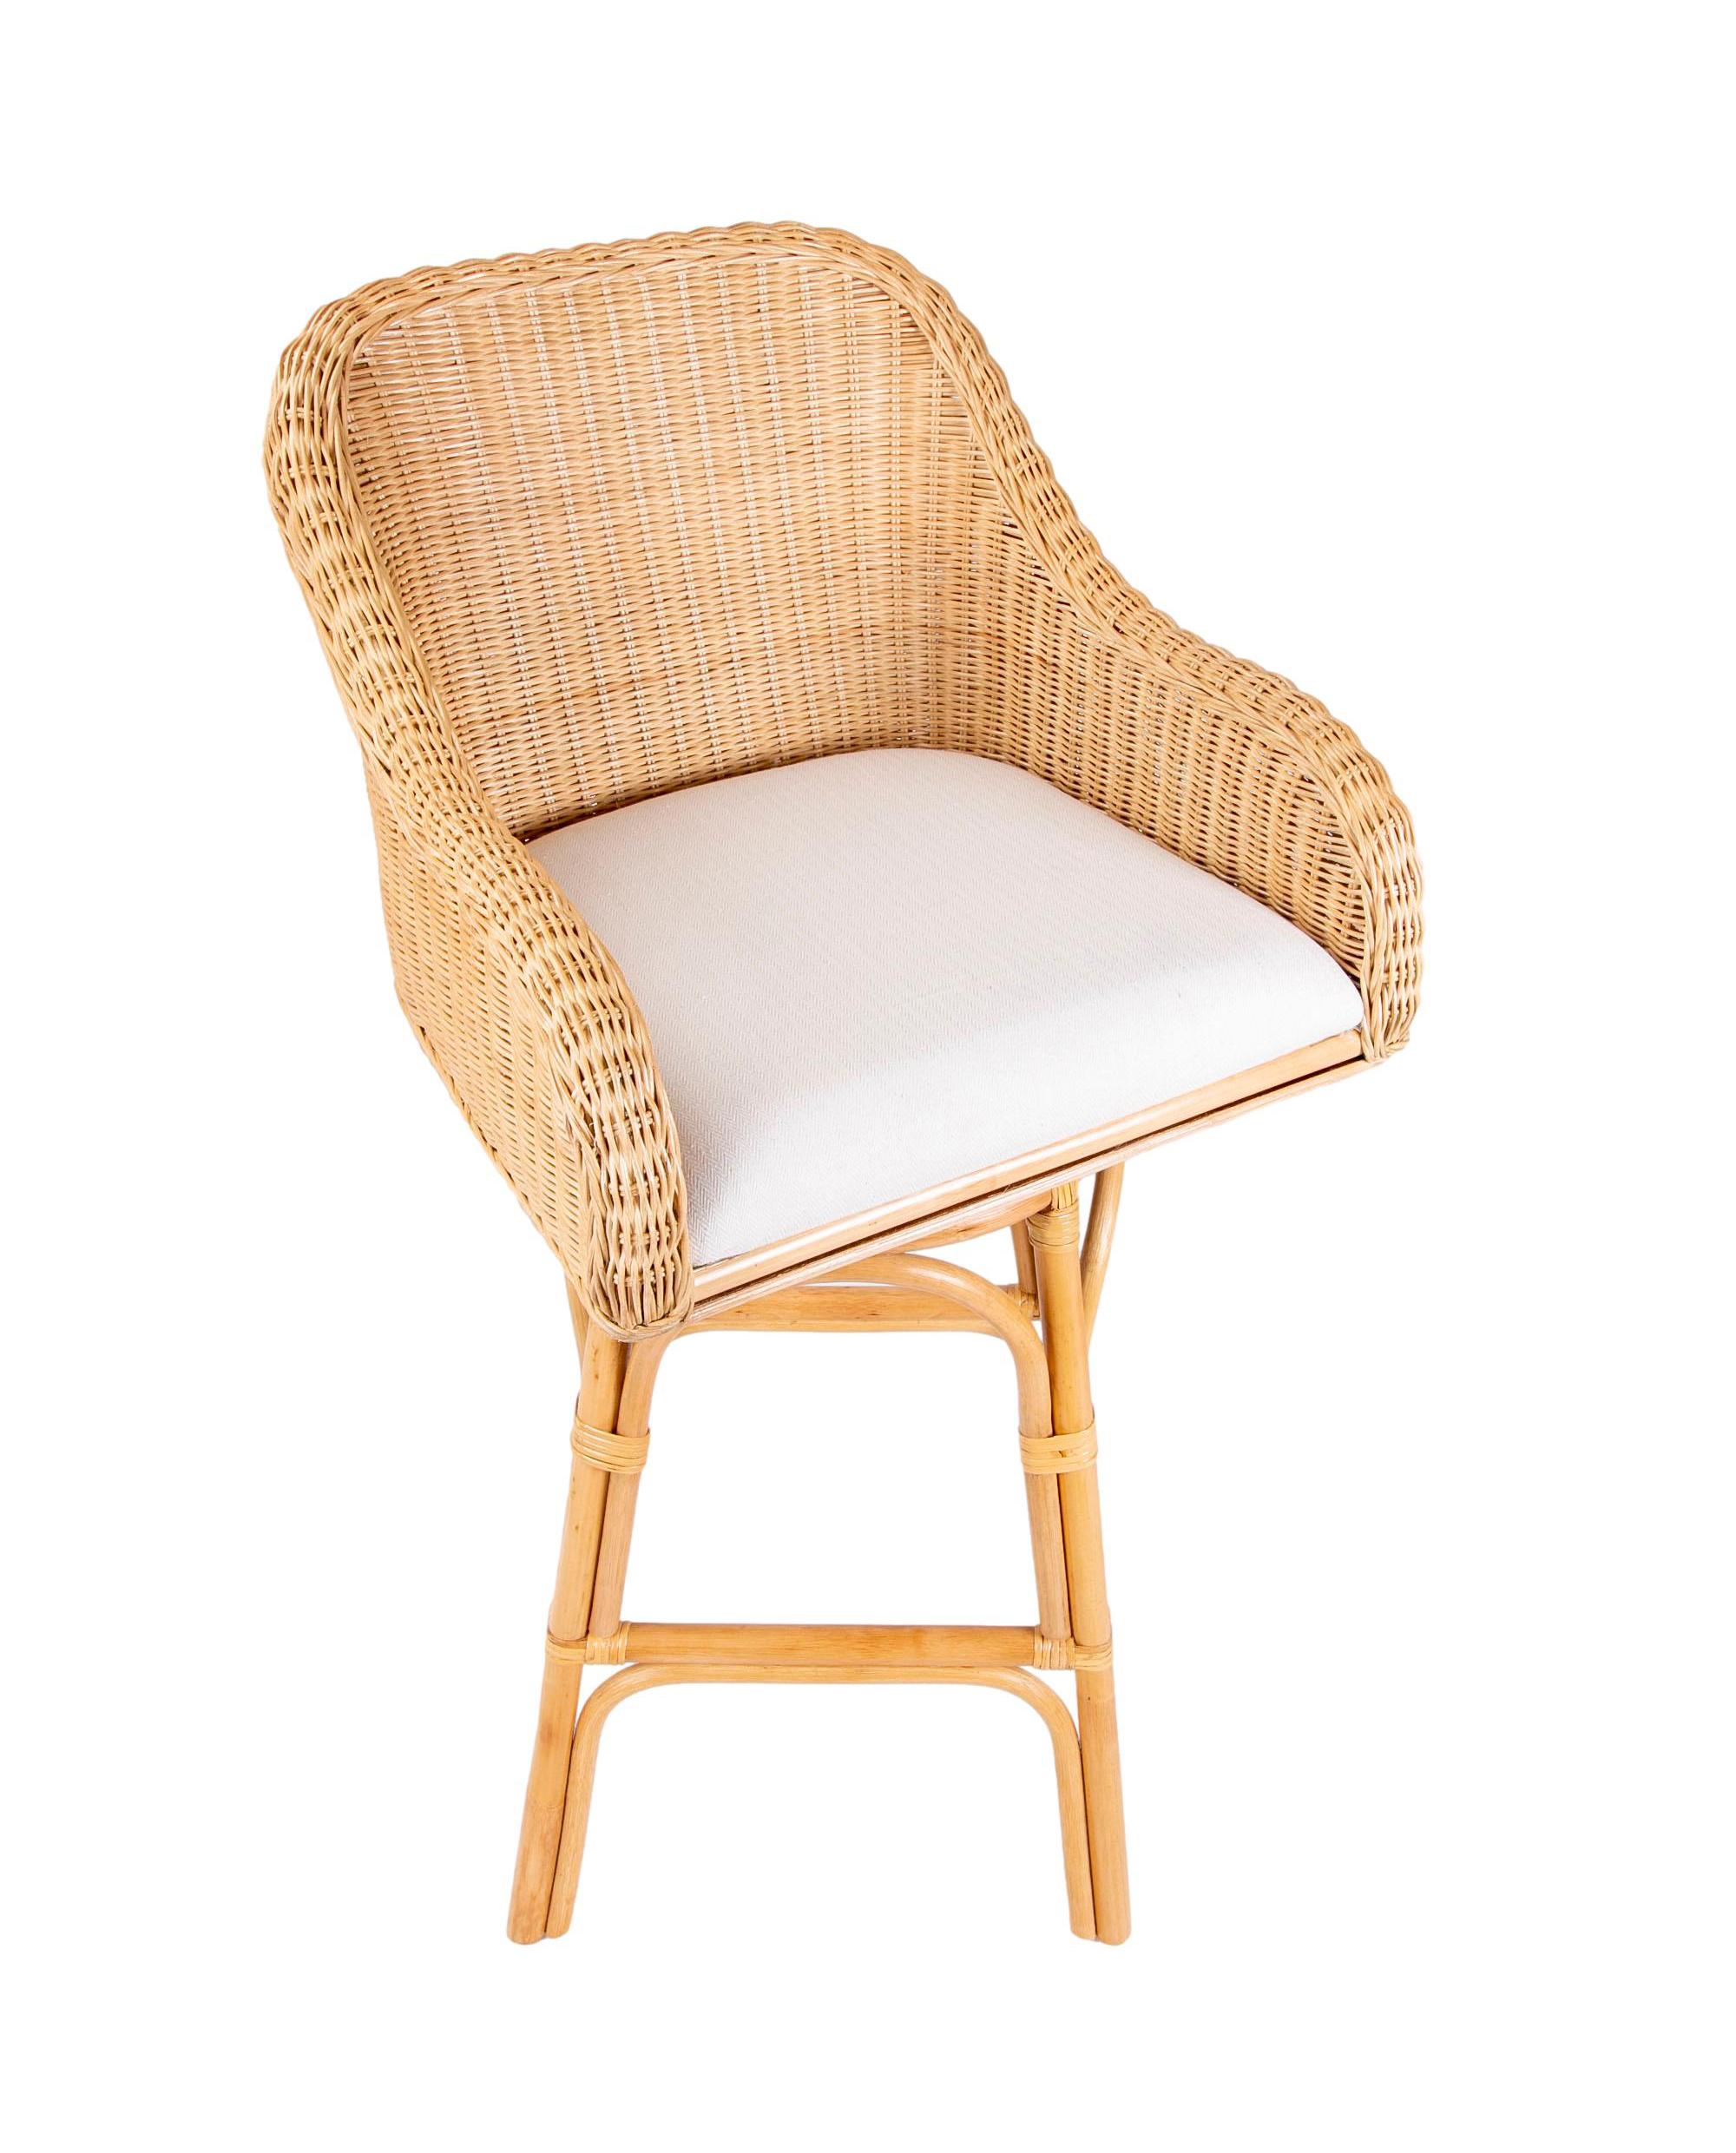 Set of Six Upholstered Rattan and Wicker Bar stools with Movement For Sale 4